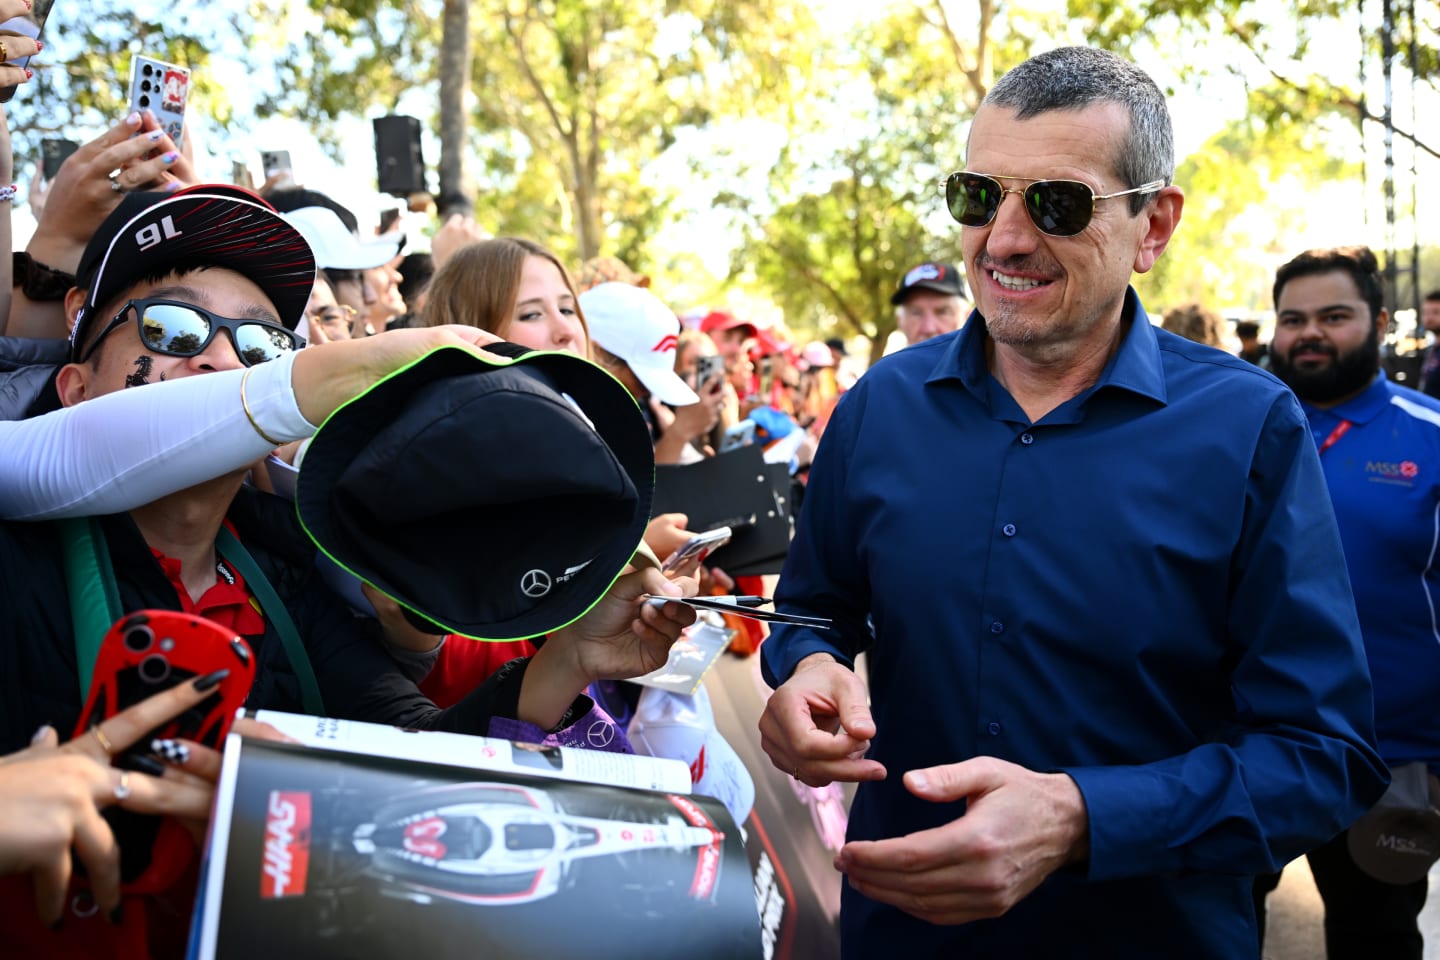 MELBOURNE, AUSTRALIA - MARCH 22: Guenther Steiner greets fans on the Melbourne Walk prior to